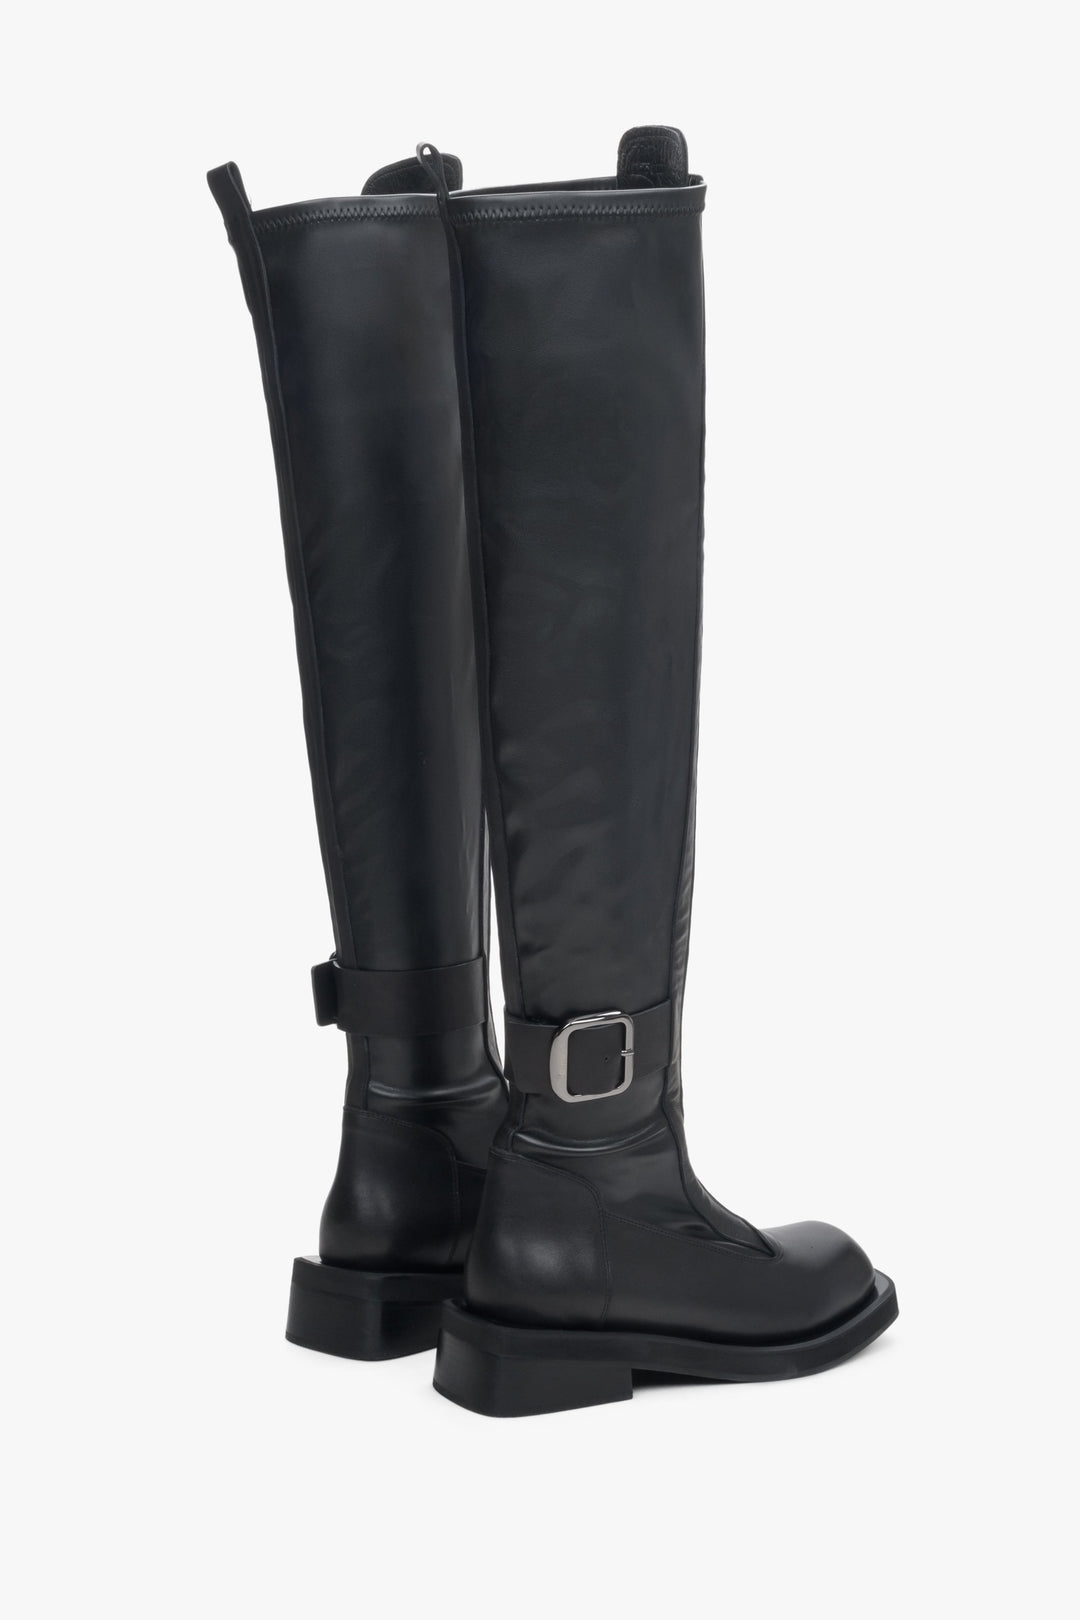 Estro women's black leather boots with elastic shaft.